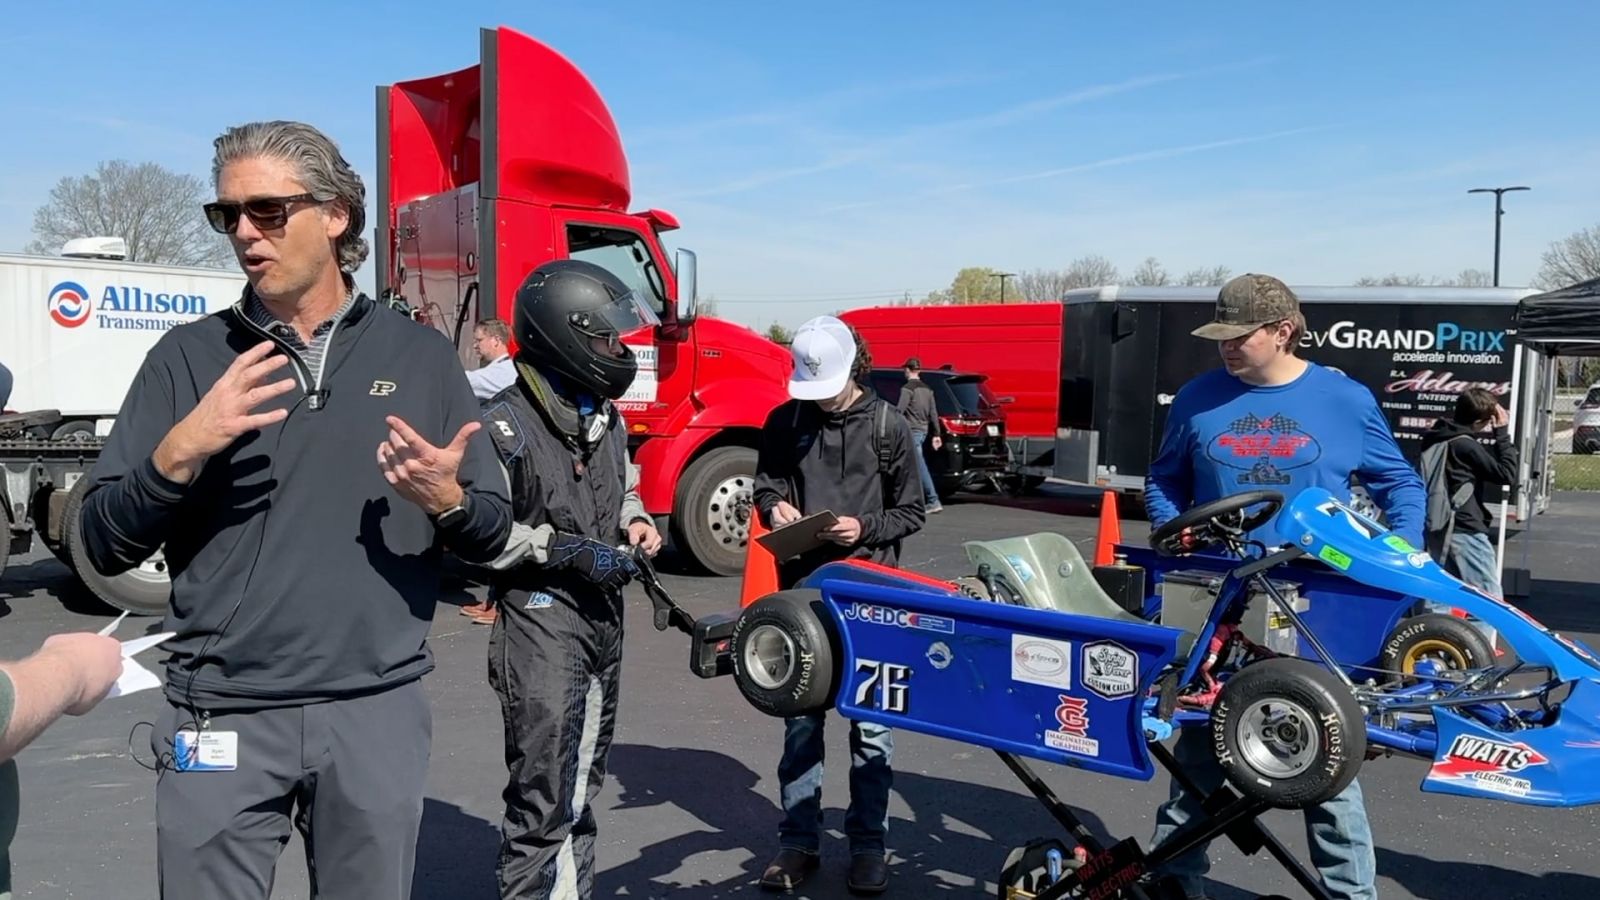 Ryan Milburn, product engineering vice president at Allison Transmission, discusses the similarities between electric karts and electric semi-trucks as a student team prepares their kart for a track run. (Purdue University photo/John O'Malley)